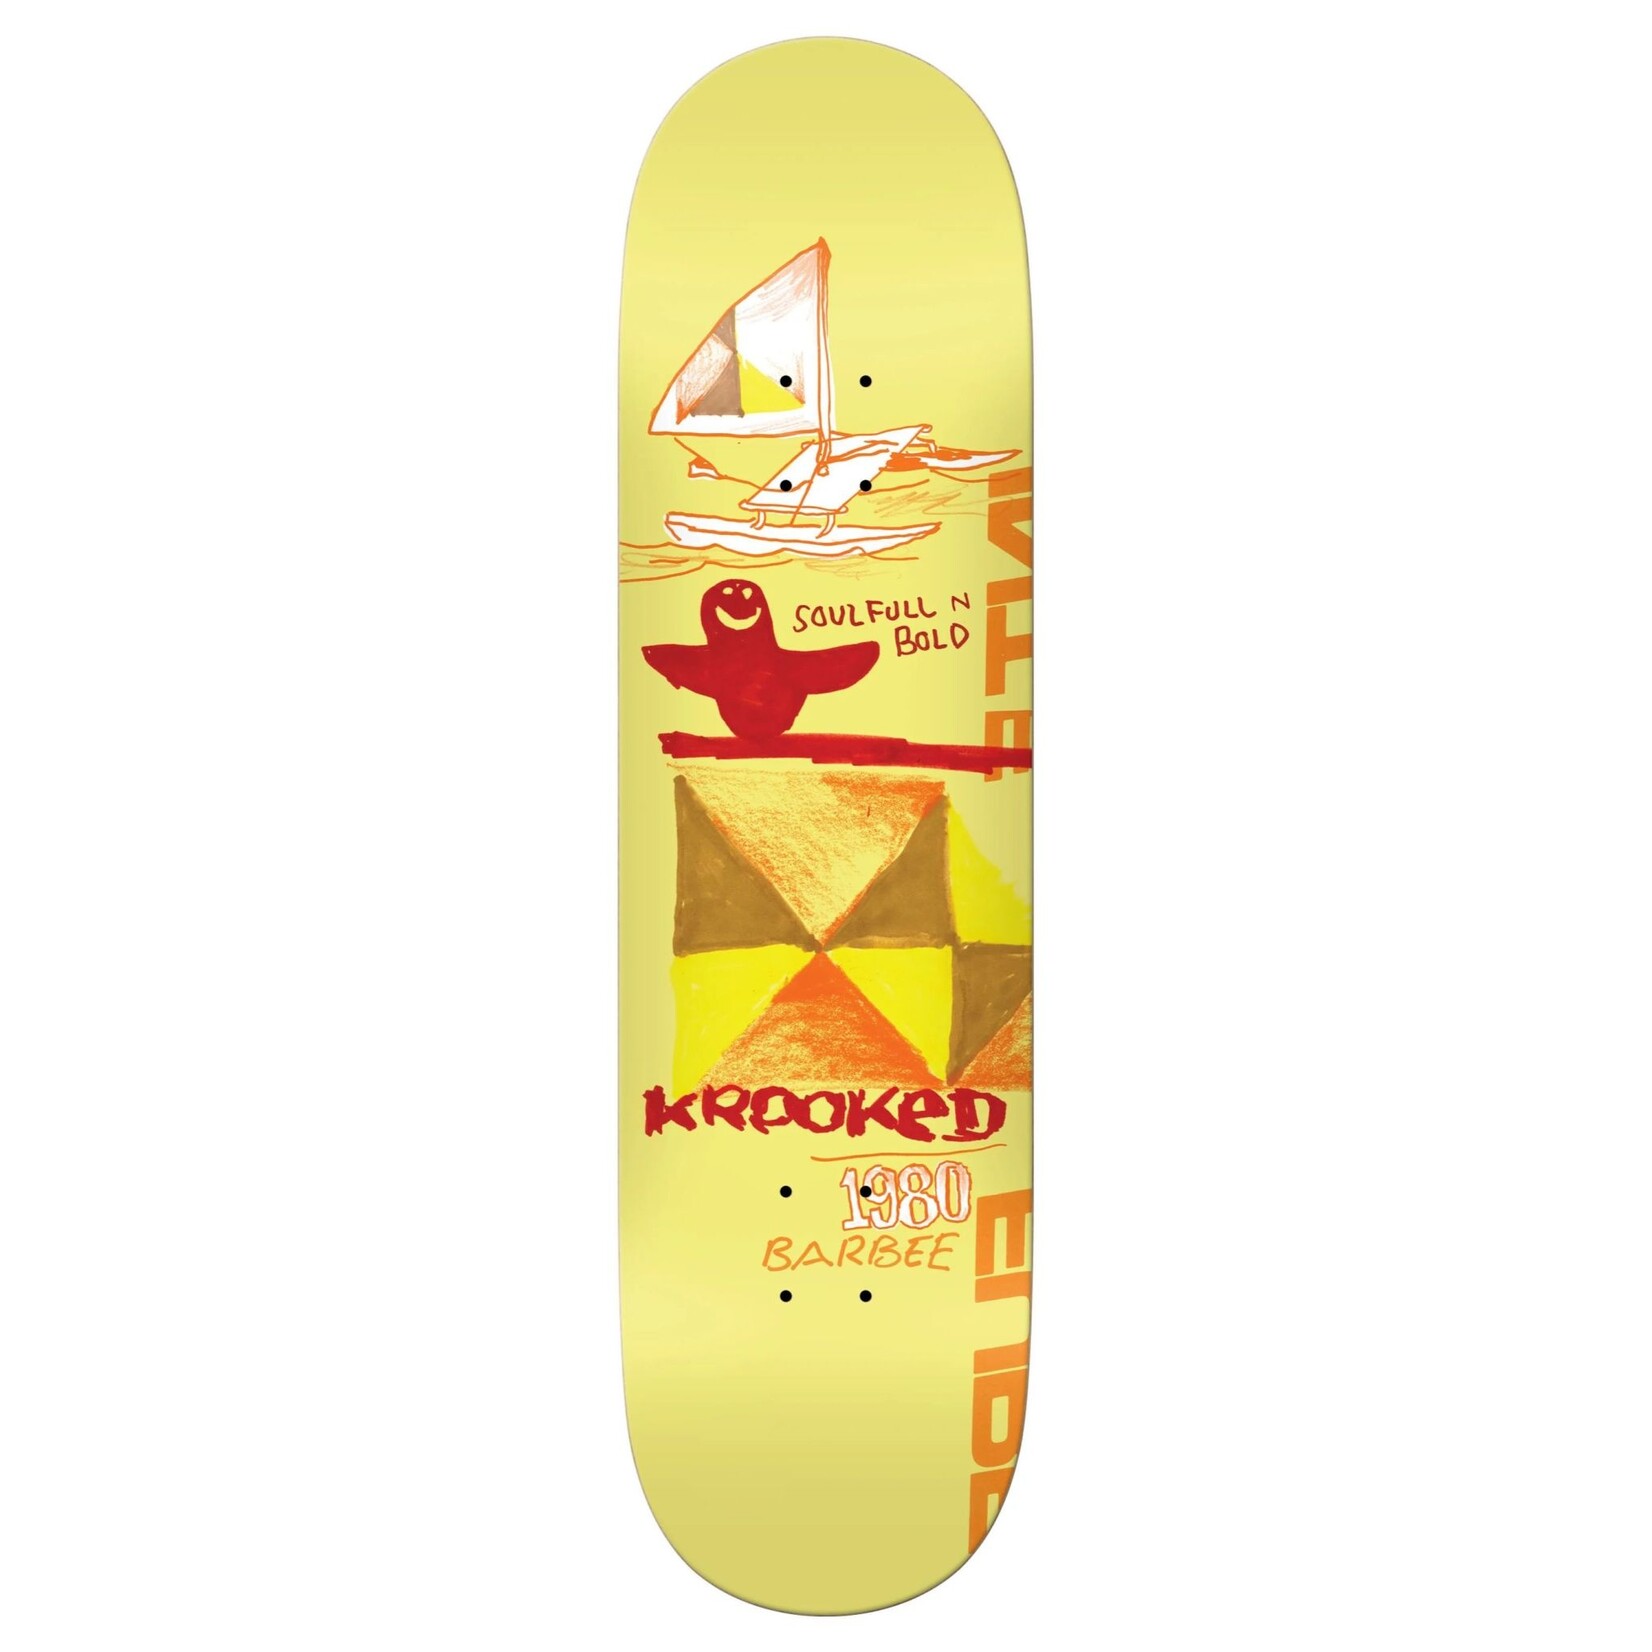 Krooked Krooked Barbee Soul Full Deck - 8.5"x 31.8"